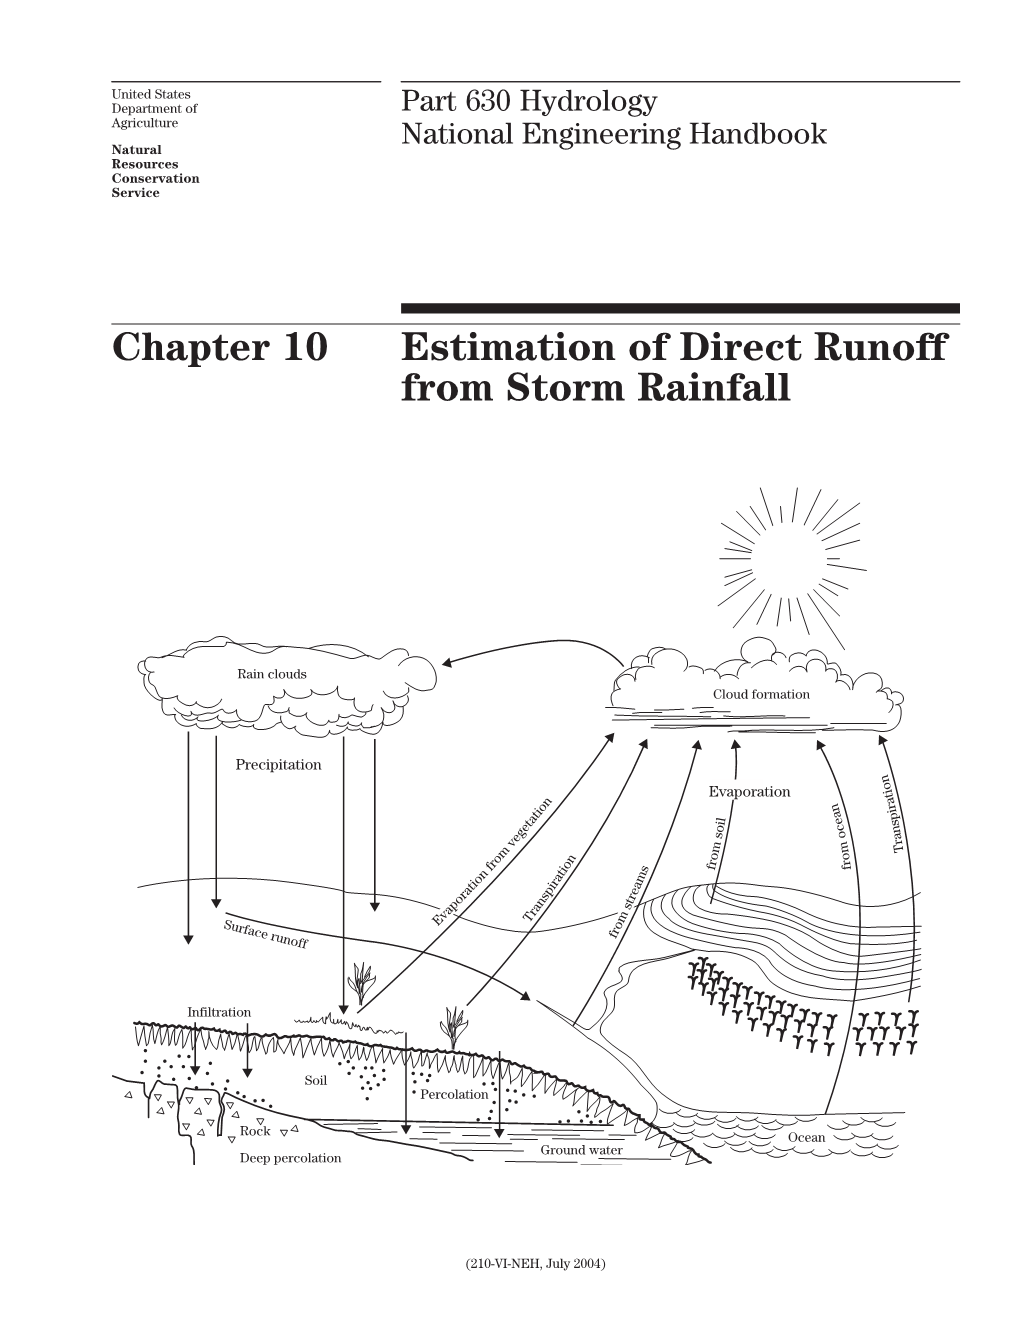 Chapter 10 Estimation of Direct Runoff from Storm Rainfall